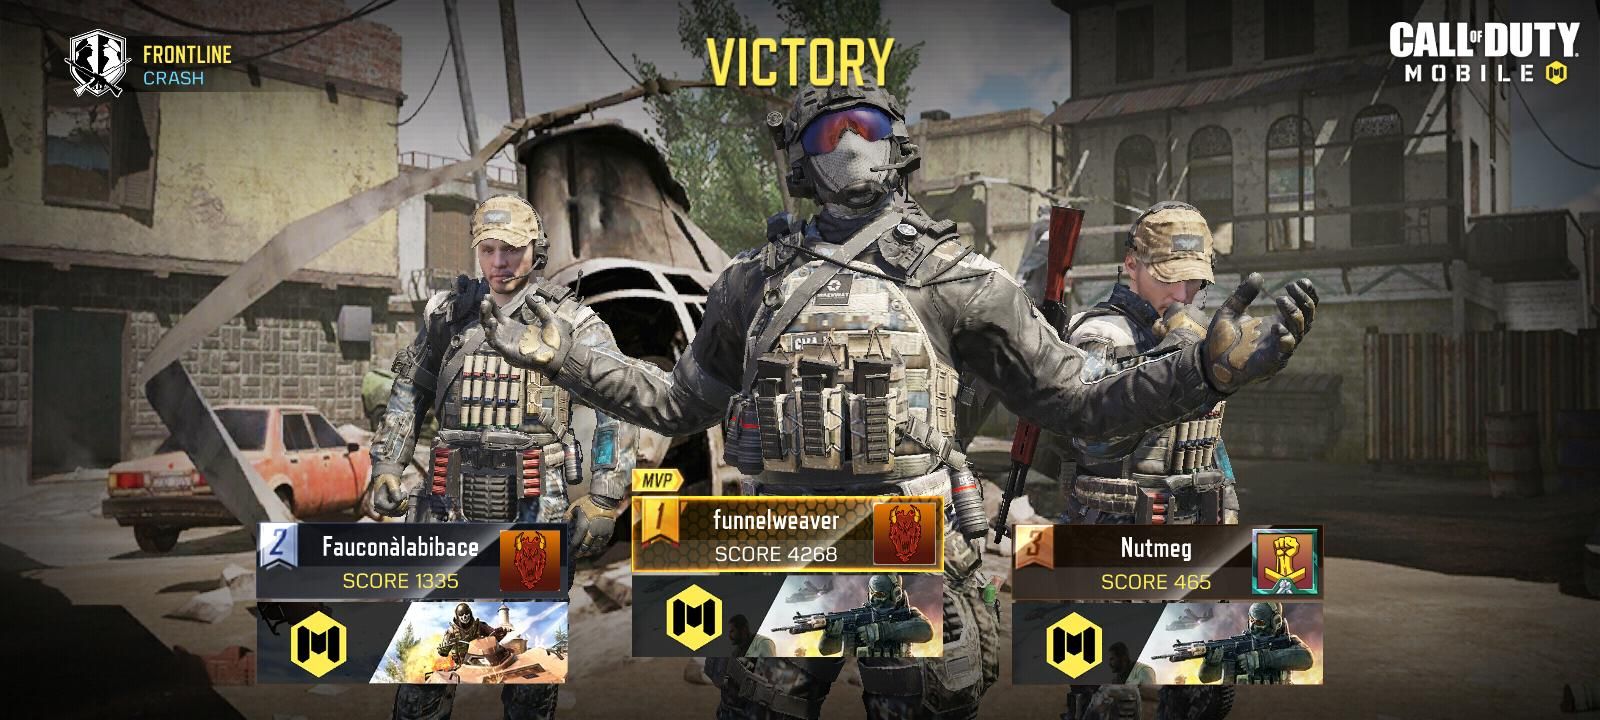 A Call of Duty Mobile screenshot showing VIP for that round